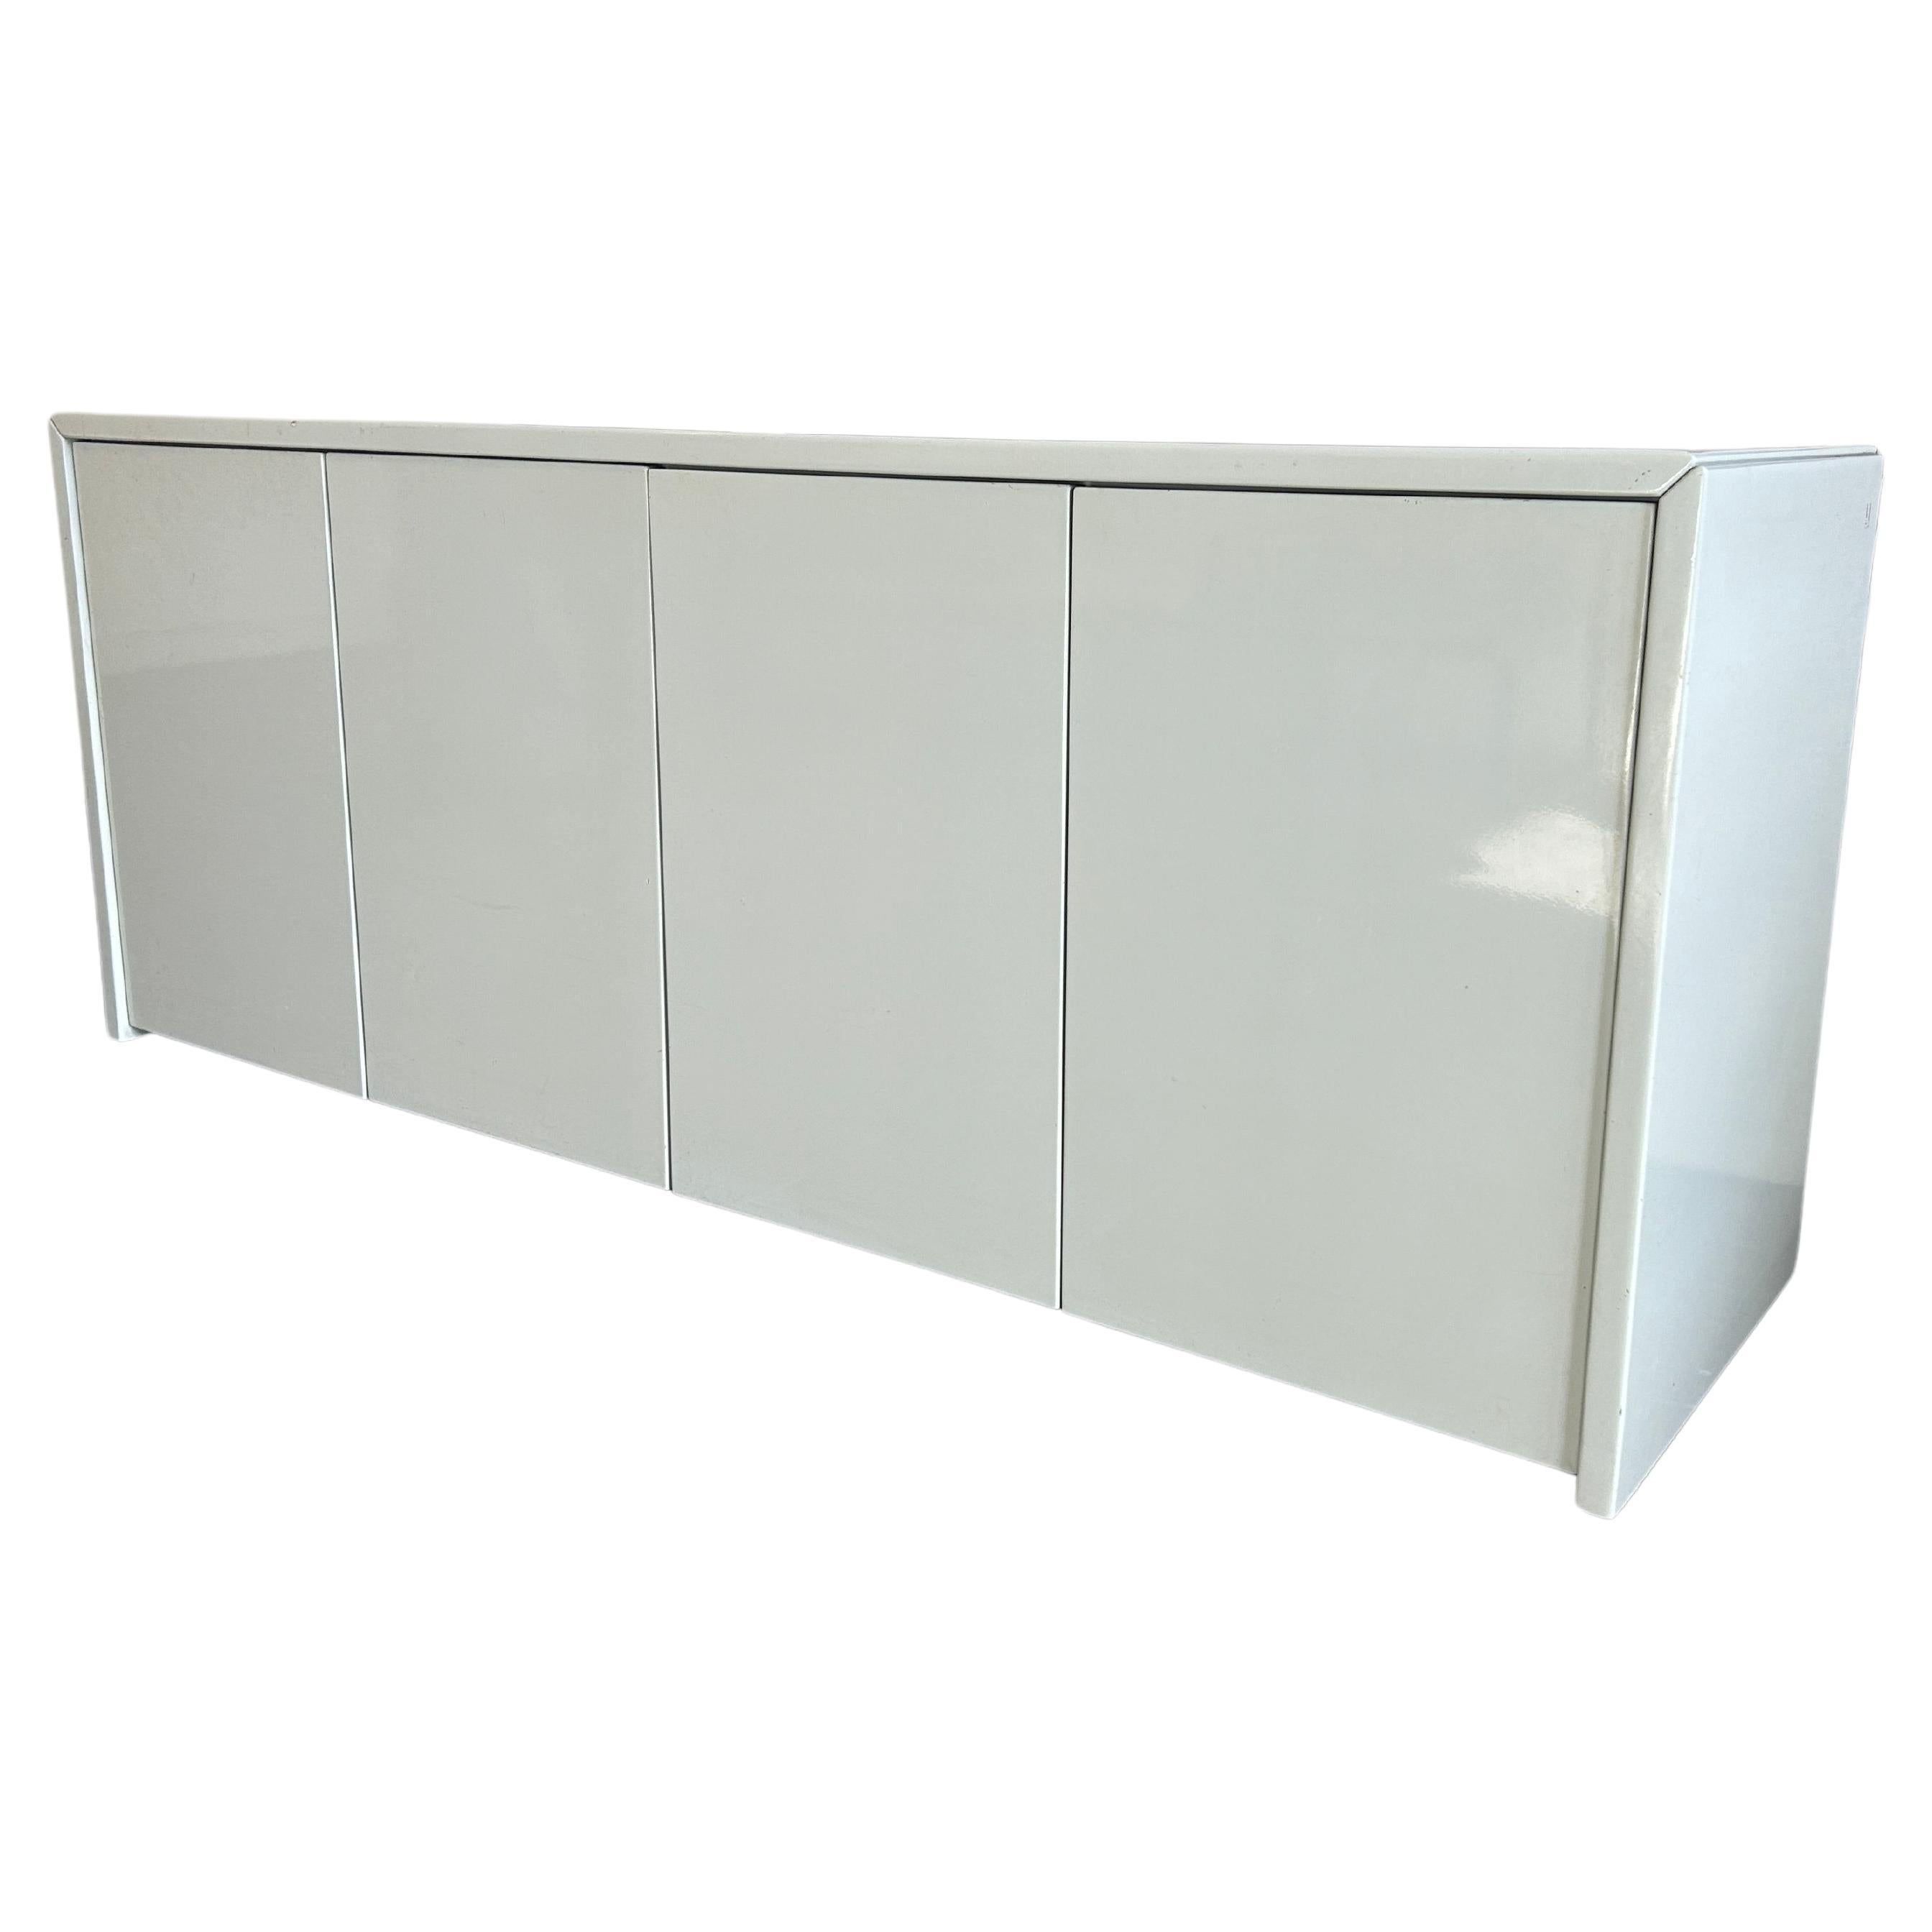 Post modern light gray gloss lacquer 4 door credenza Cabinet